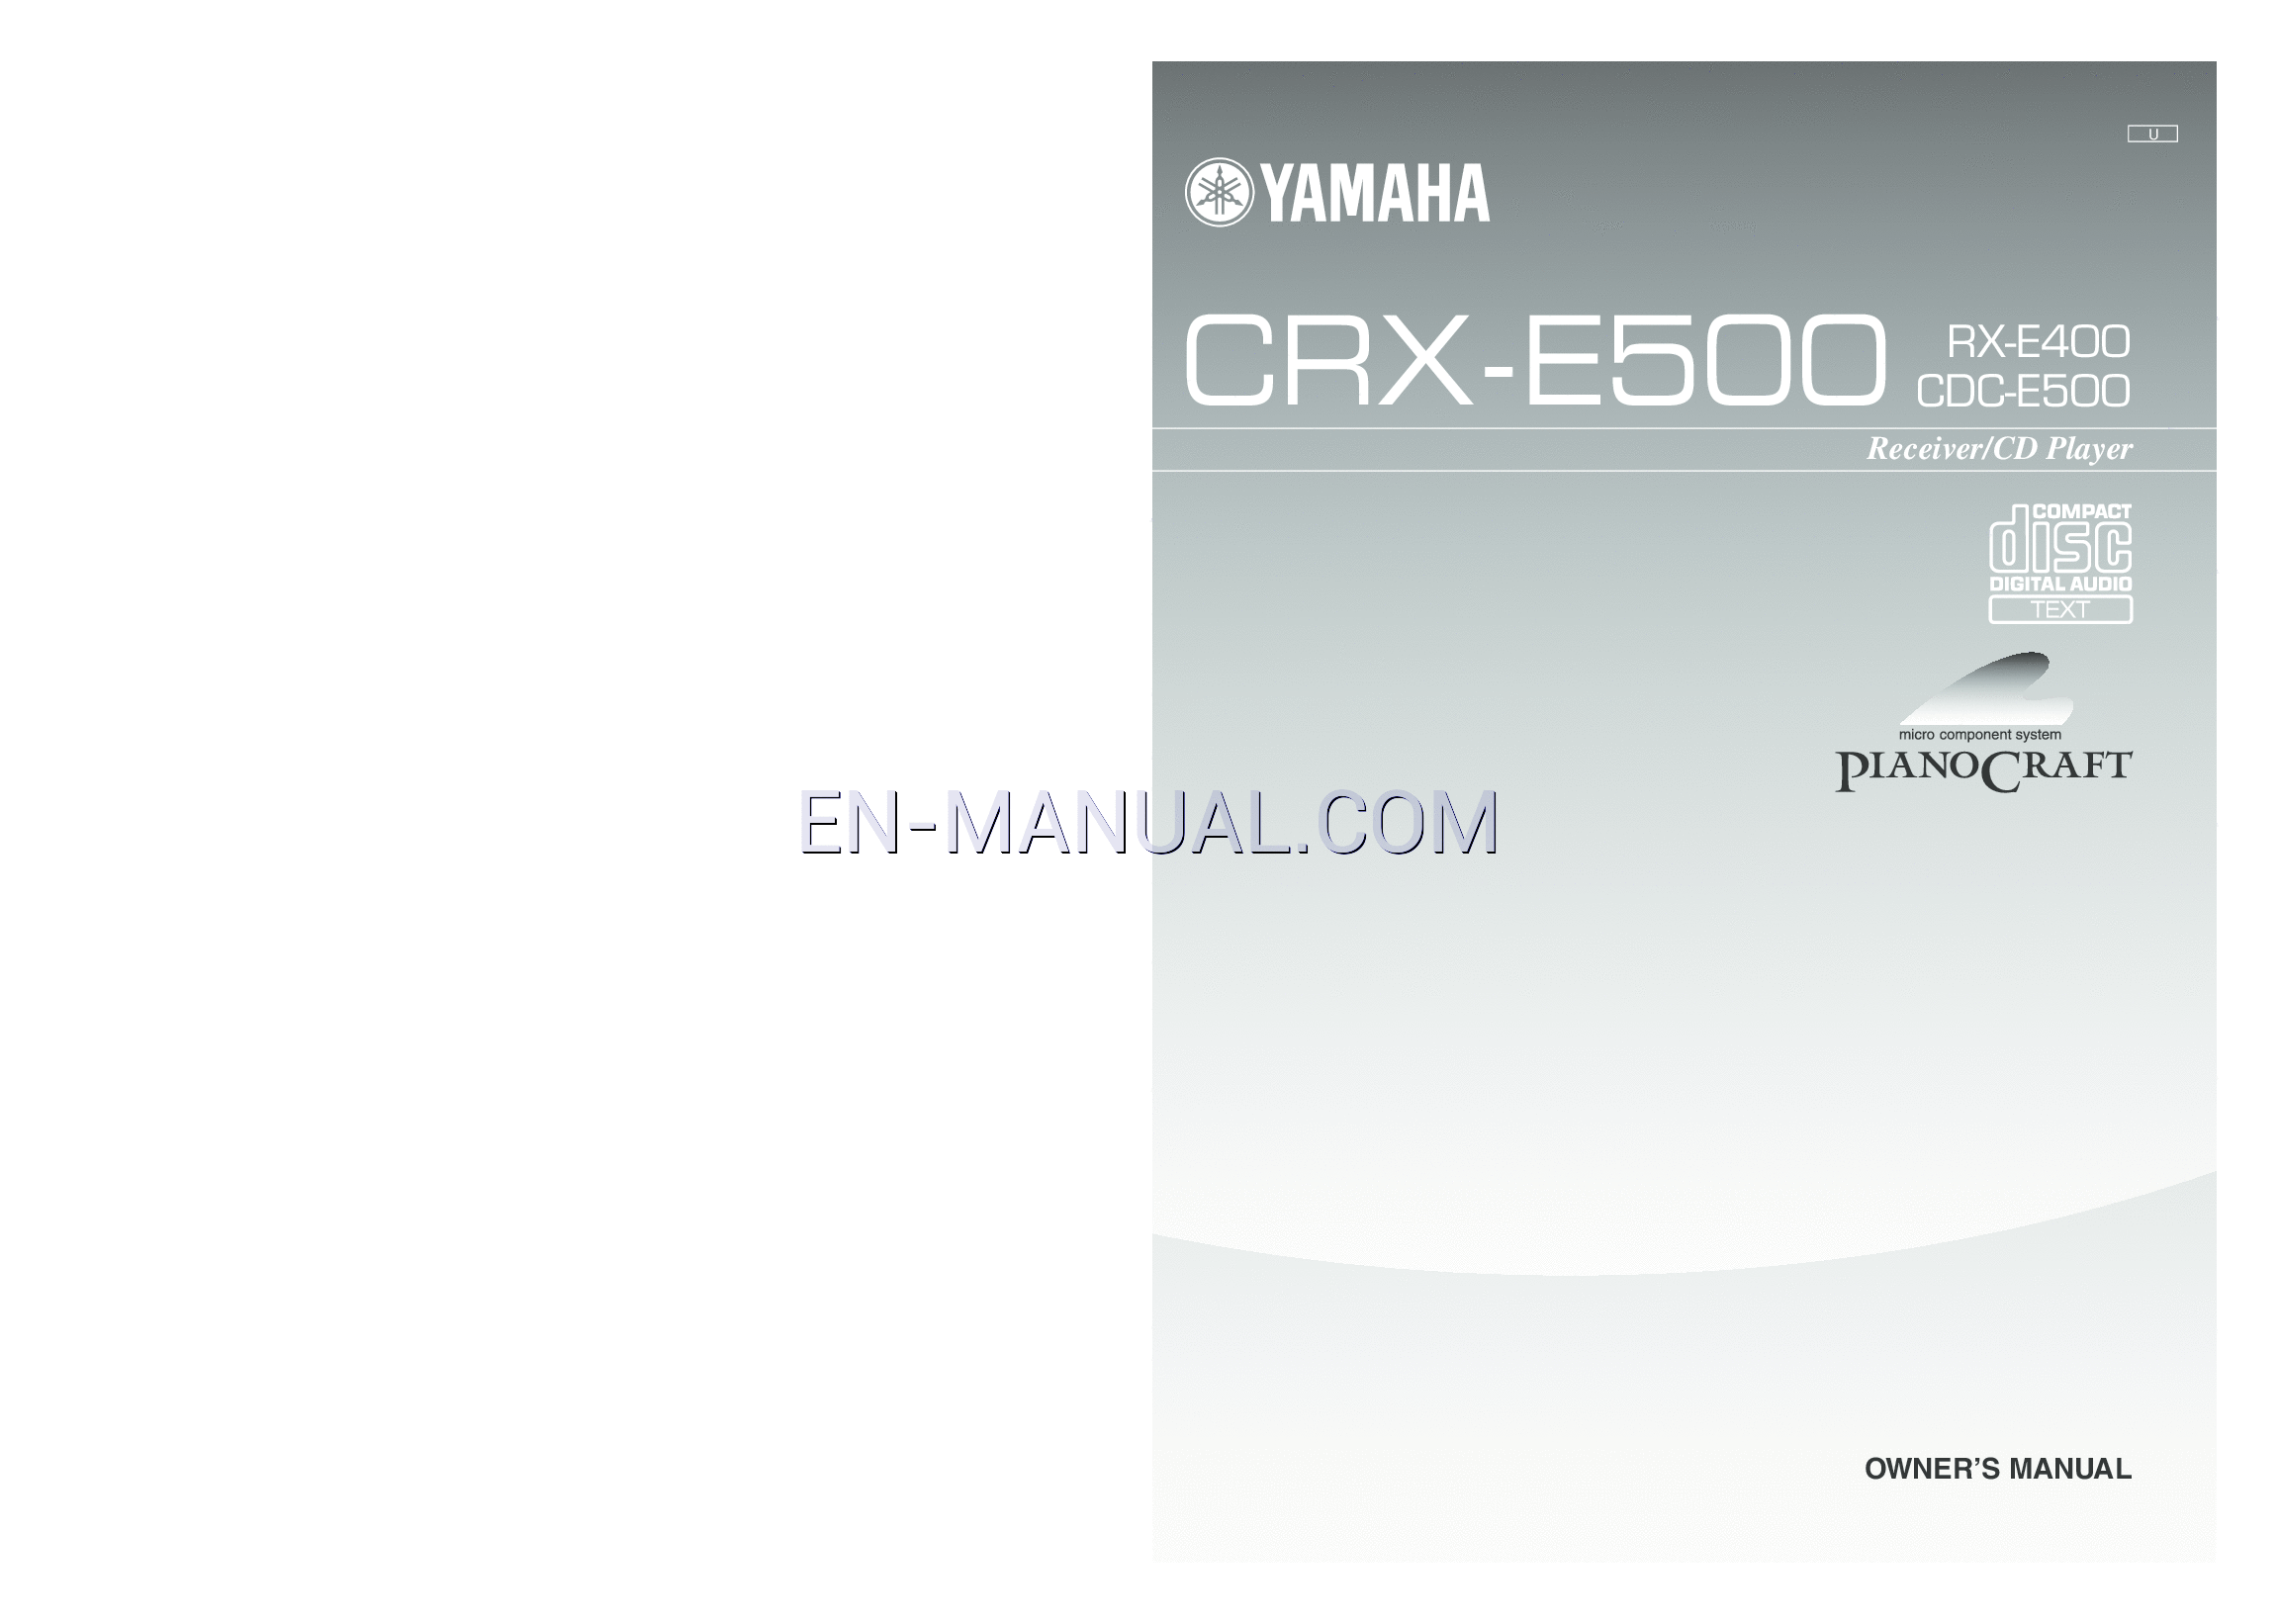 Read online Owner's Manual for Yamaha CRX-E500 (Page 1)